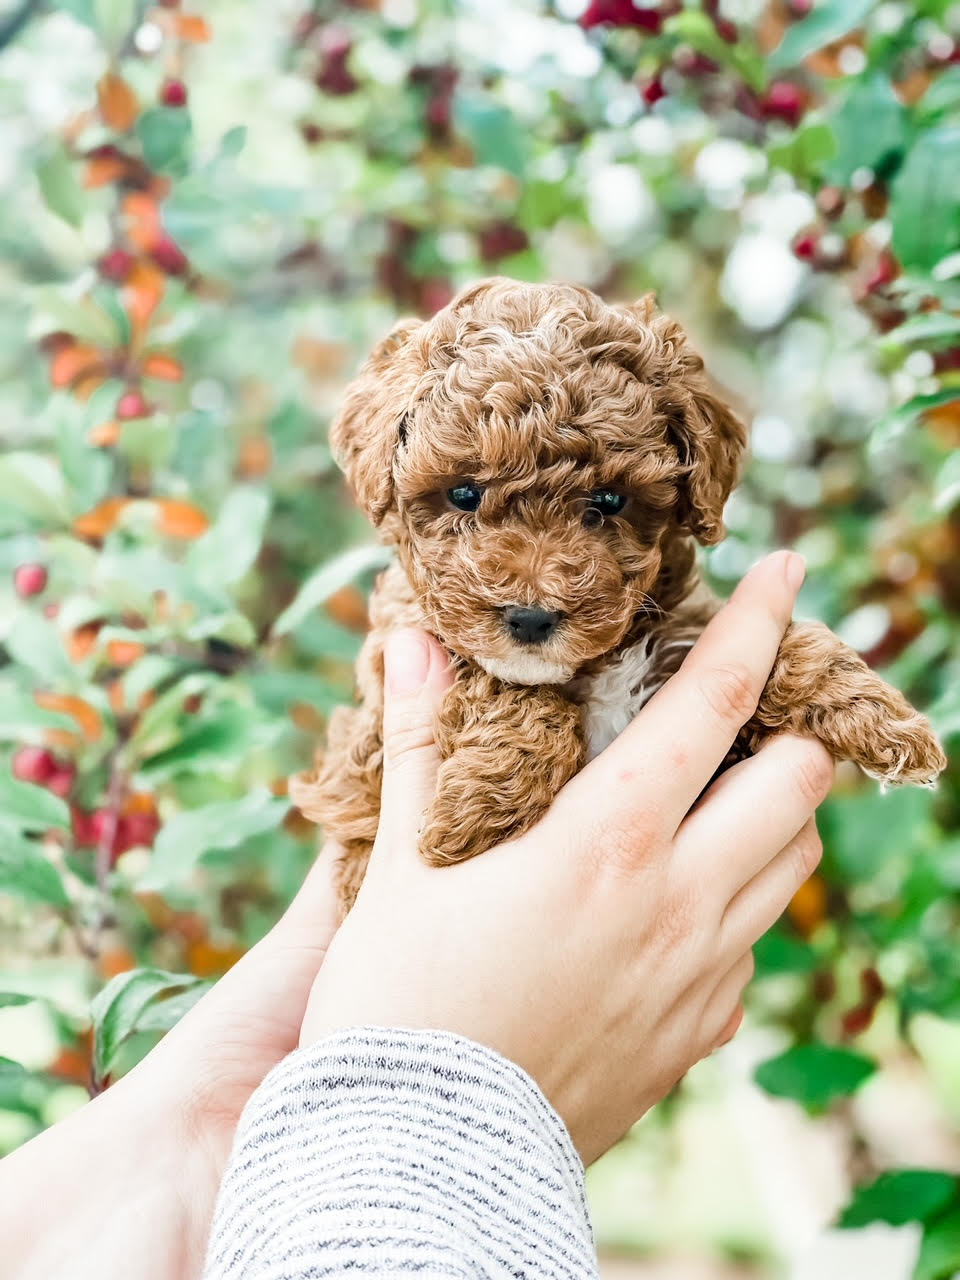 A person gently cradling a tiny brown puppy in their hands, showcasing a heartwarming bond.